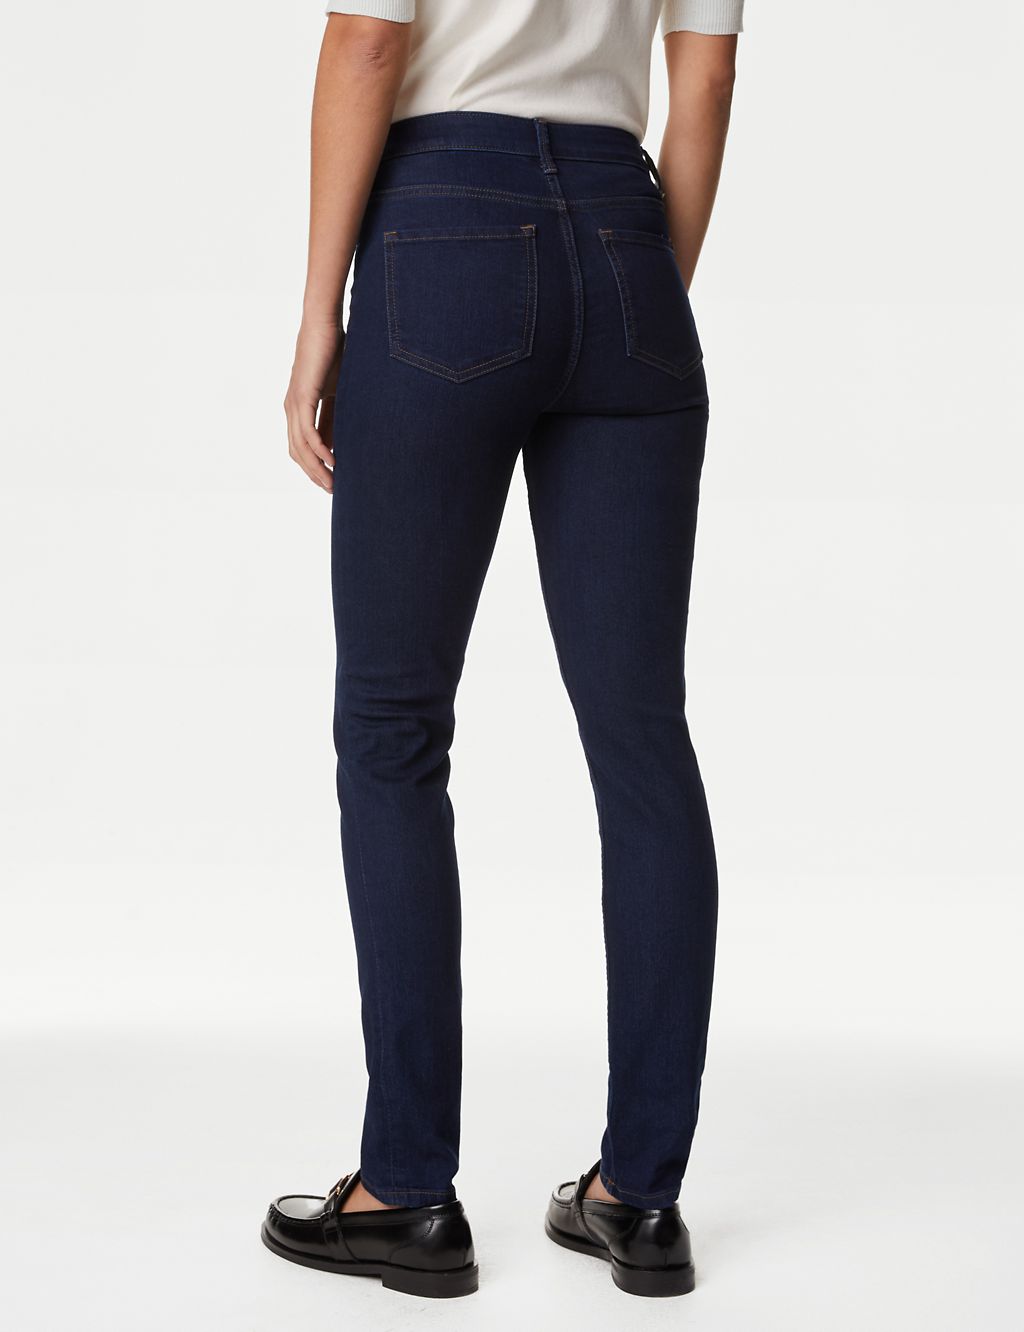 Lily Slim Fit Jeans with Stretch 6 of 6